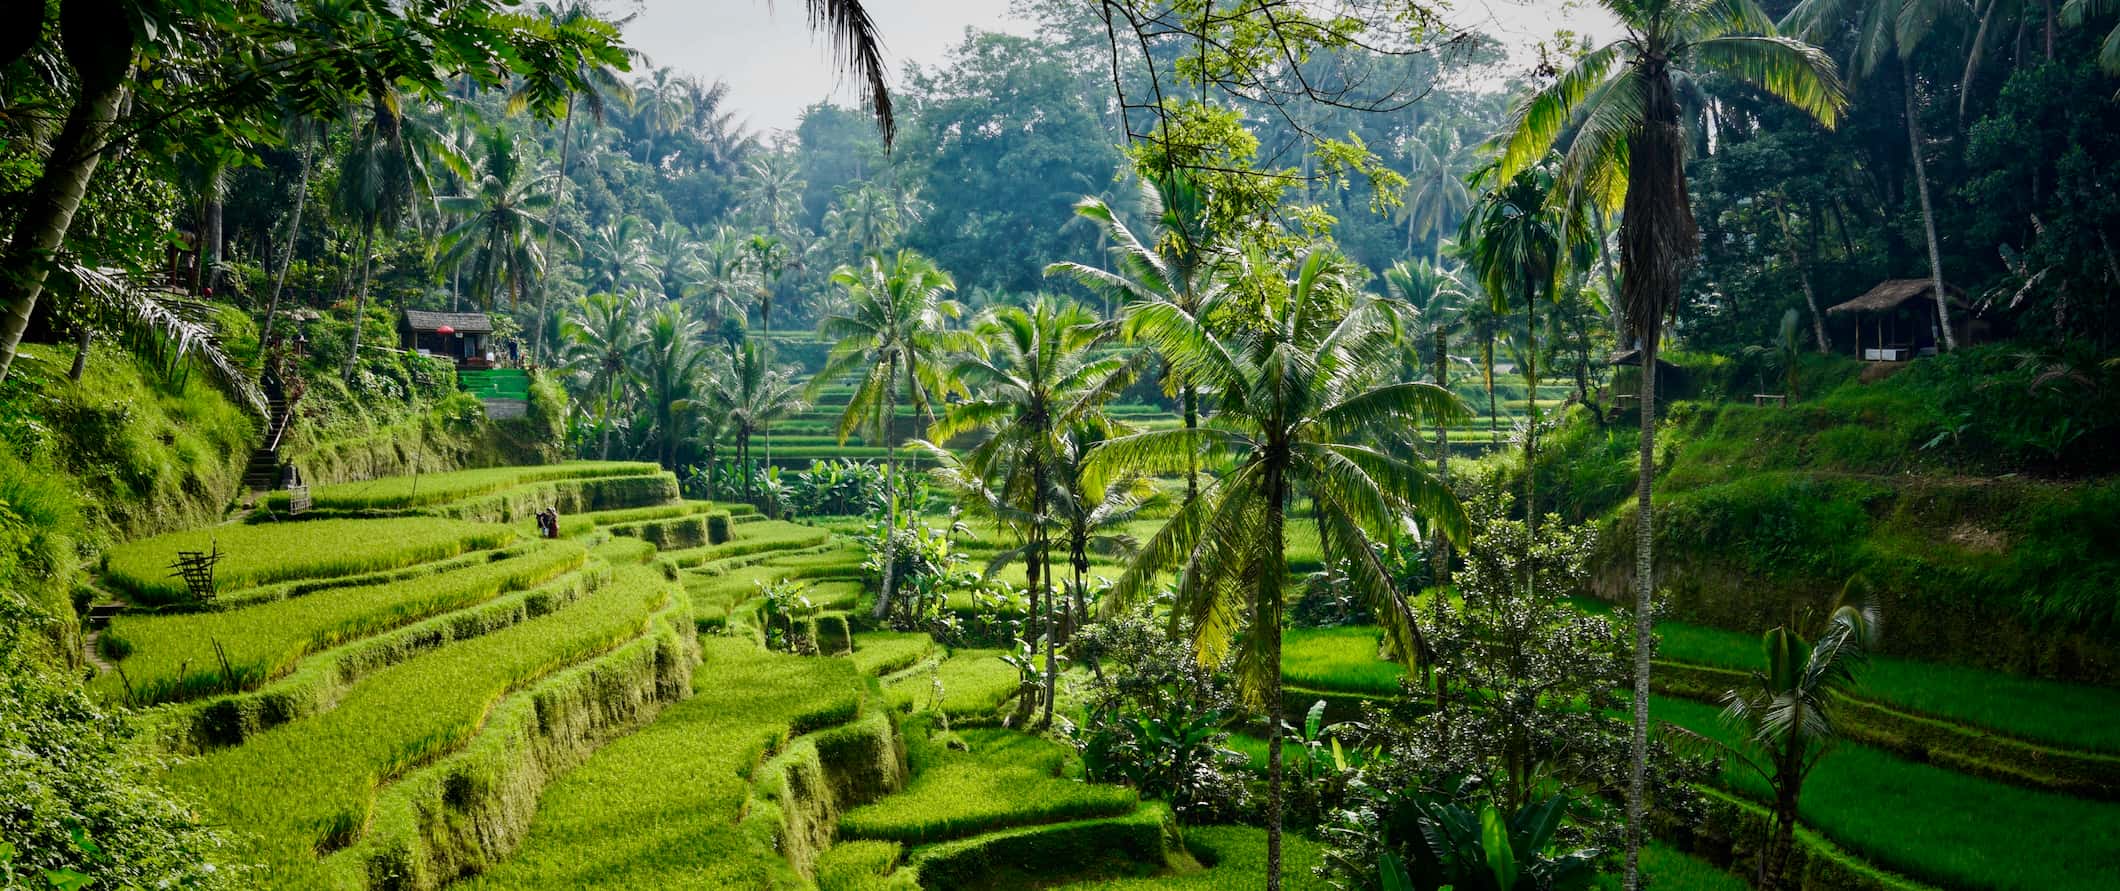 The lush green rice fields of Bali, Indonesia surrounded by towering jungle